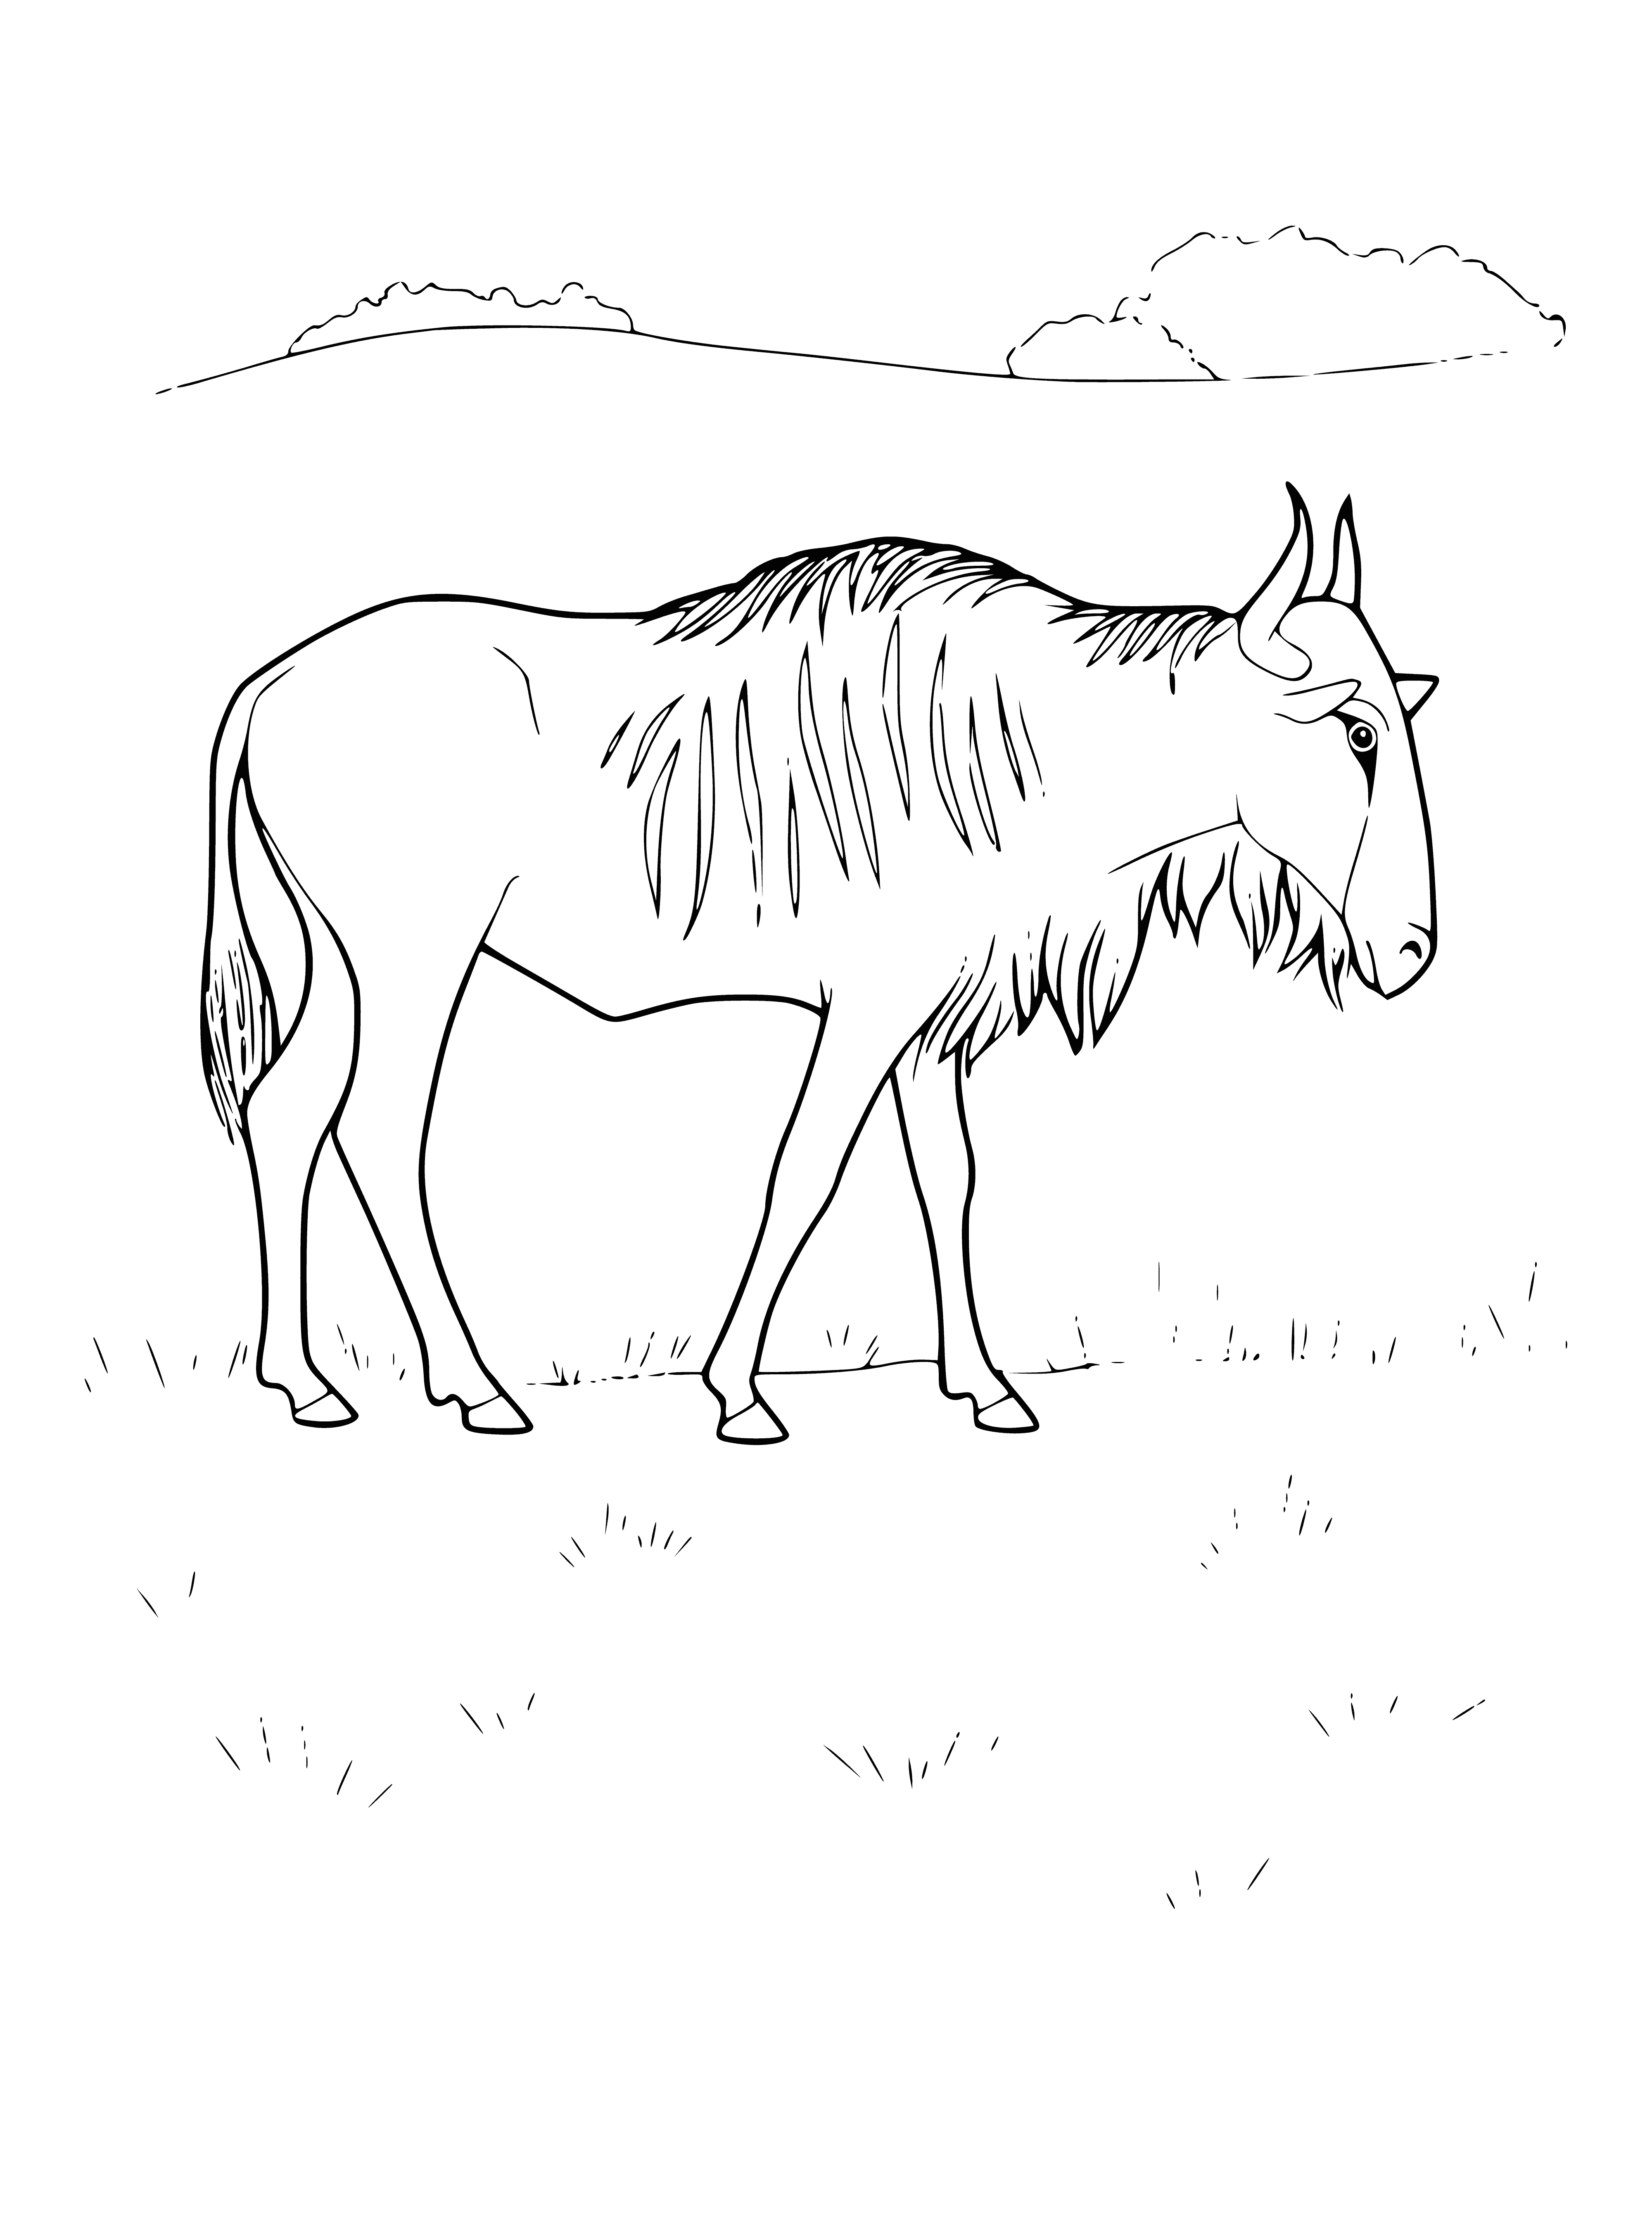 coloring page: Wildebeest are large antelopes with horns & shaggy coats; they live in herds & migrate long distances between grazing & waterholes.